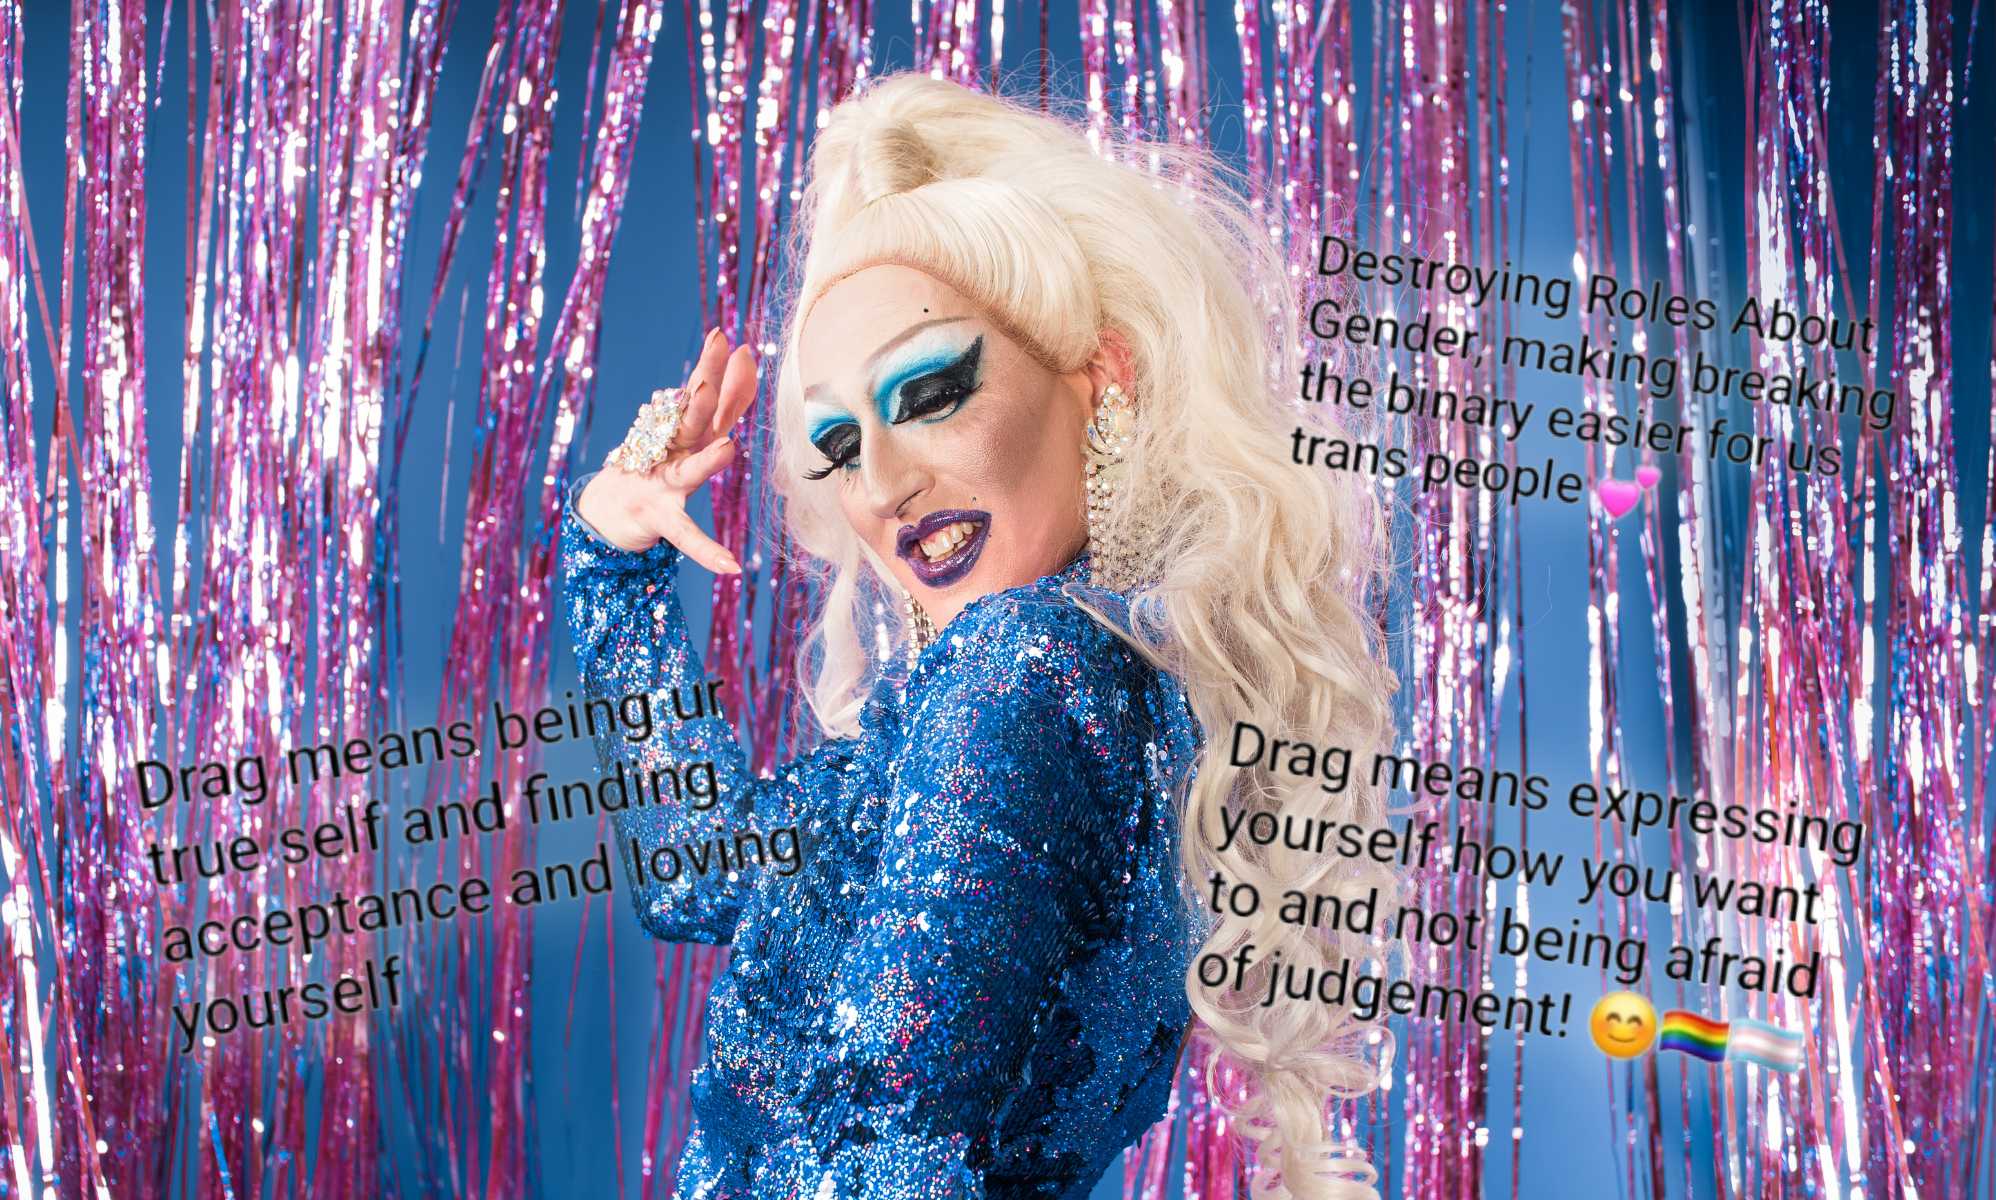 LGBT people on what drag means to them